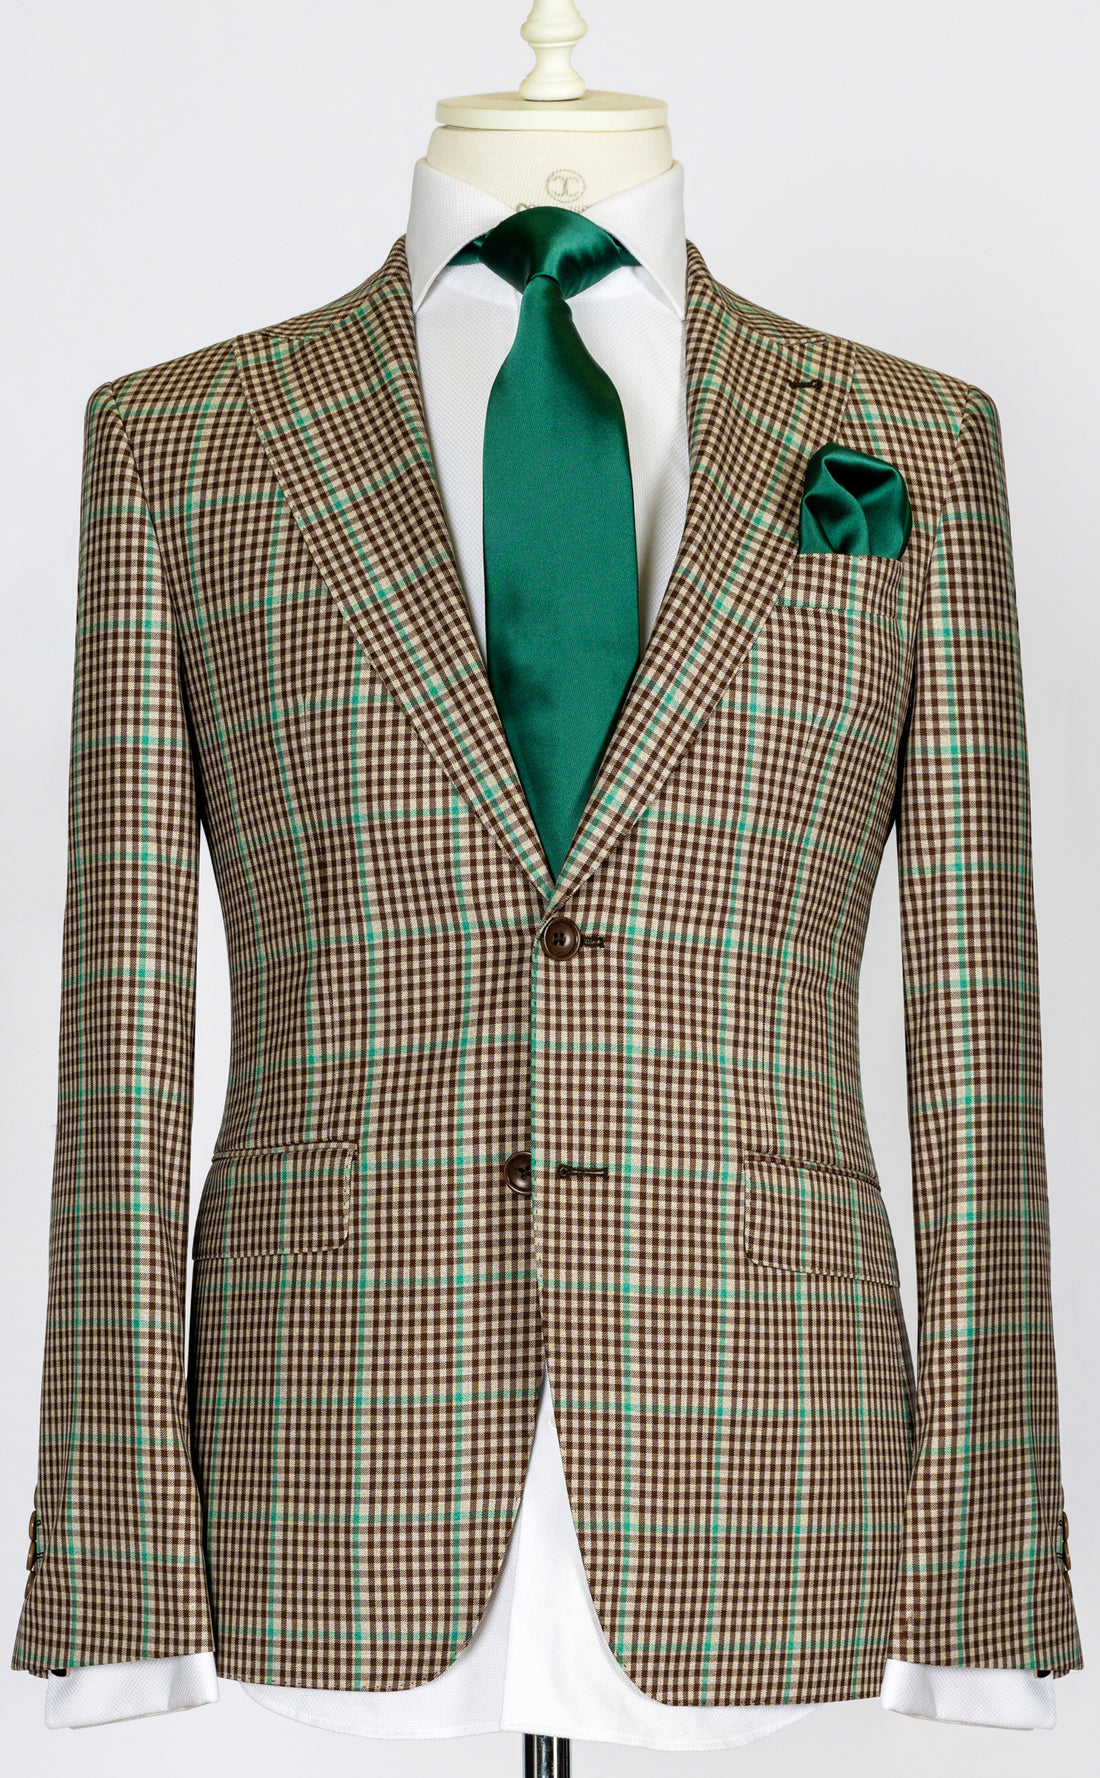 Cerruti - Brown with green gingham check pattern 2 piece slim fit suit